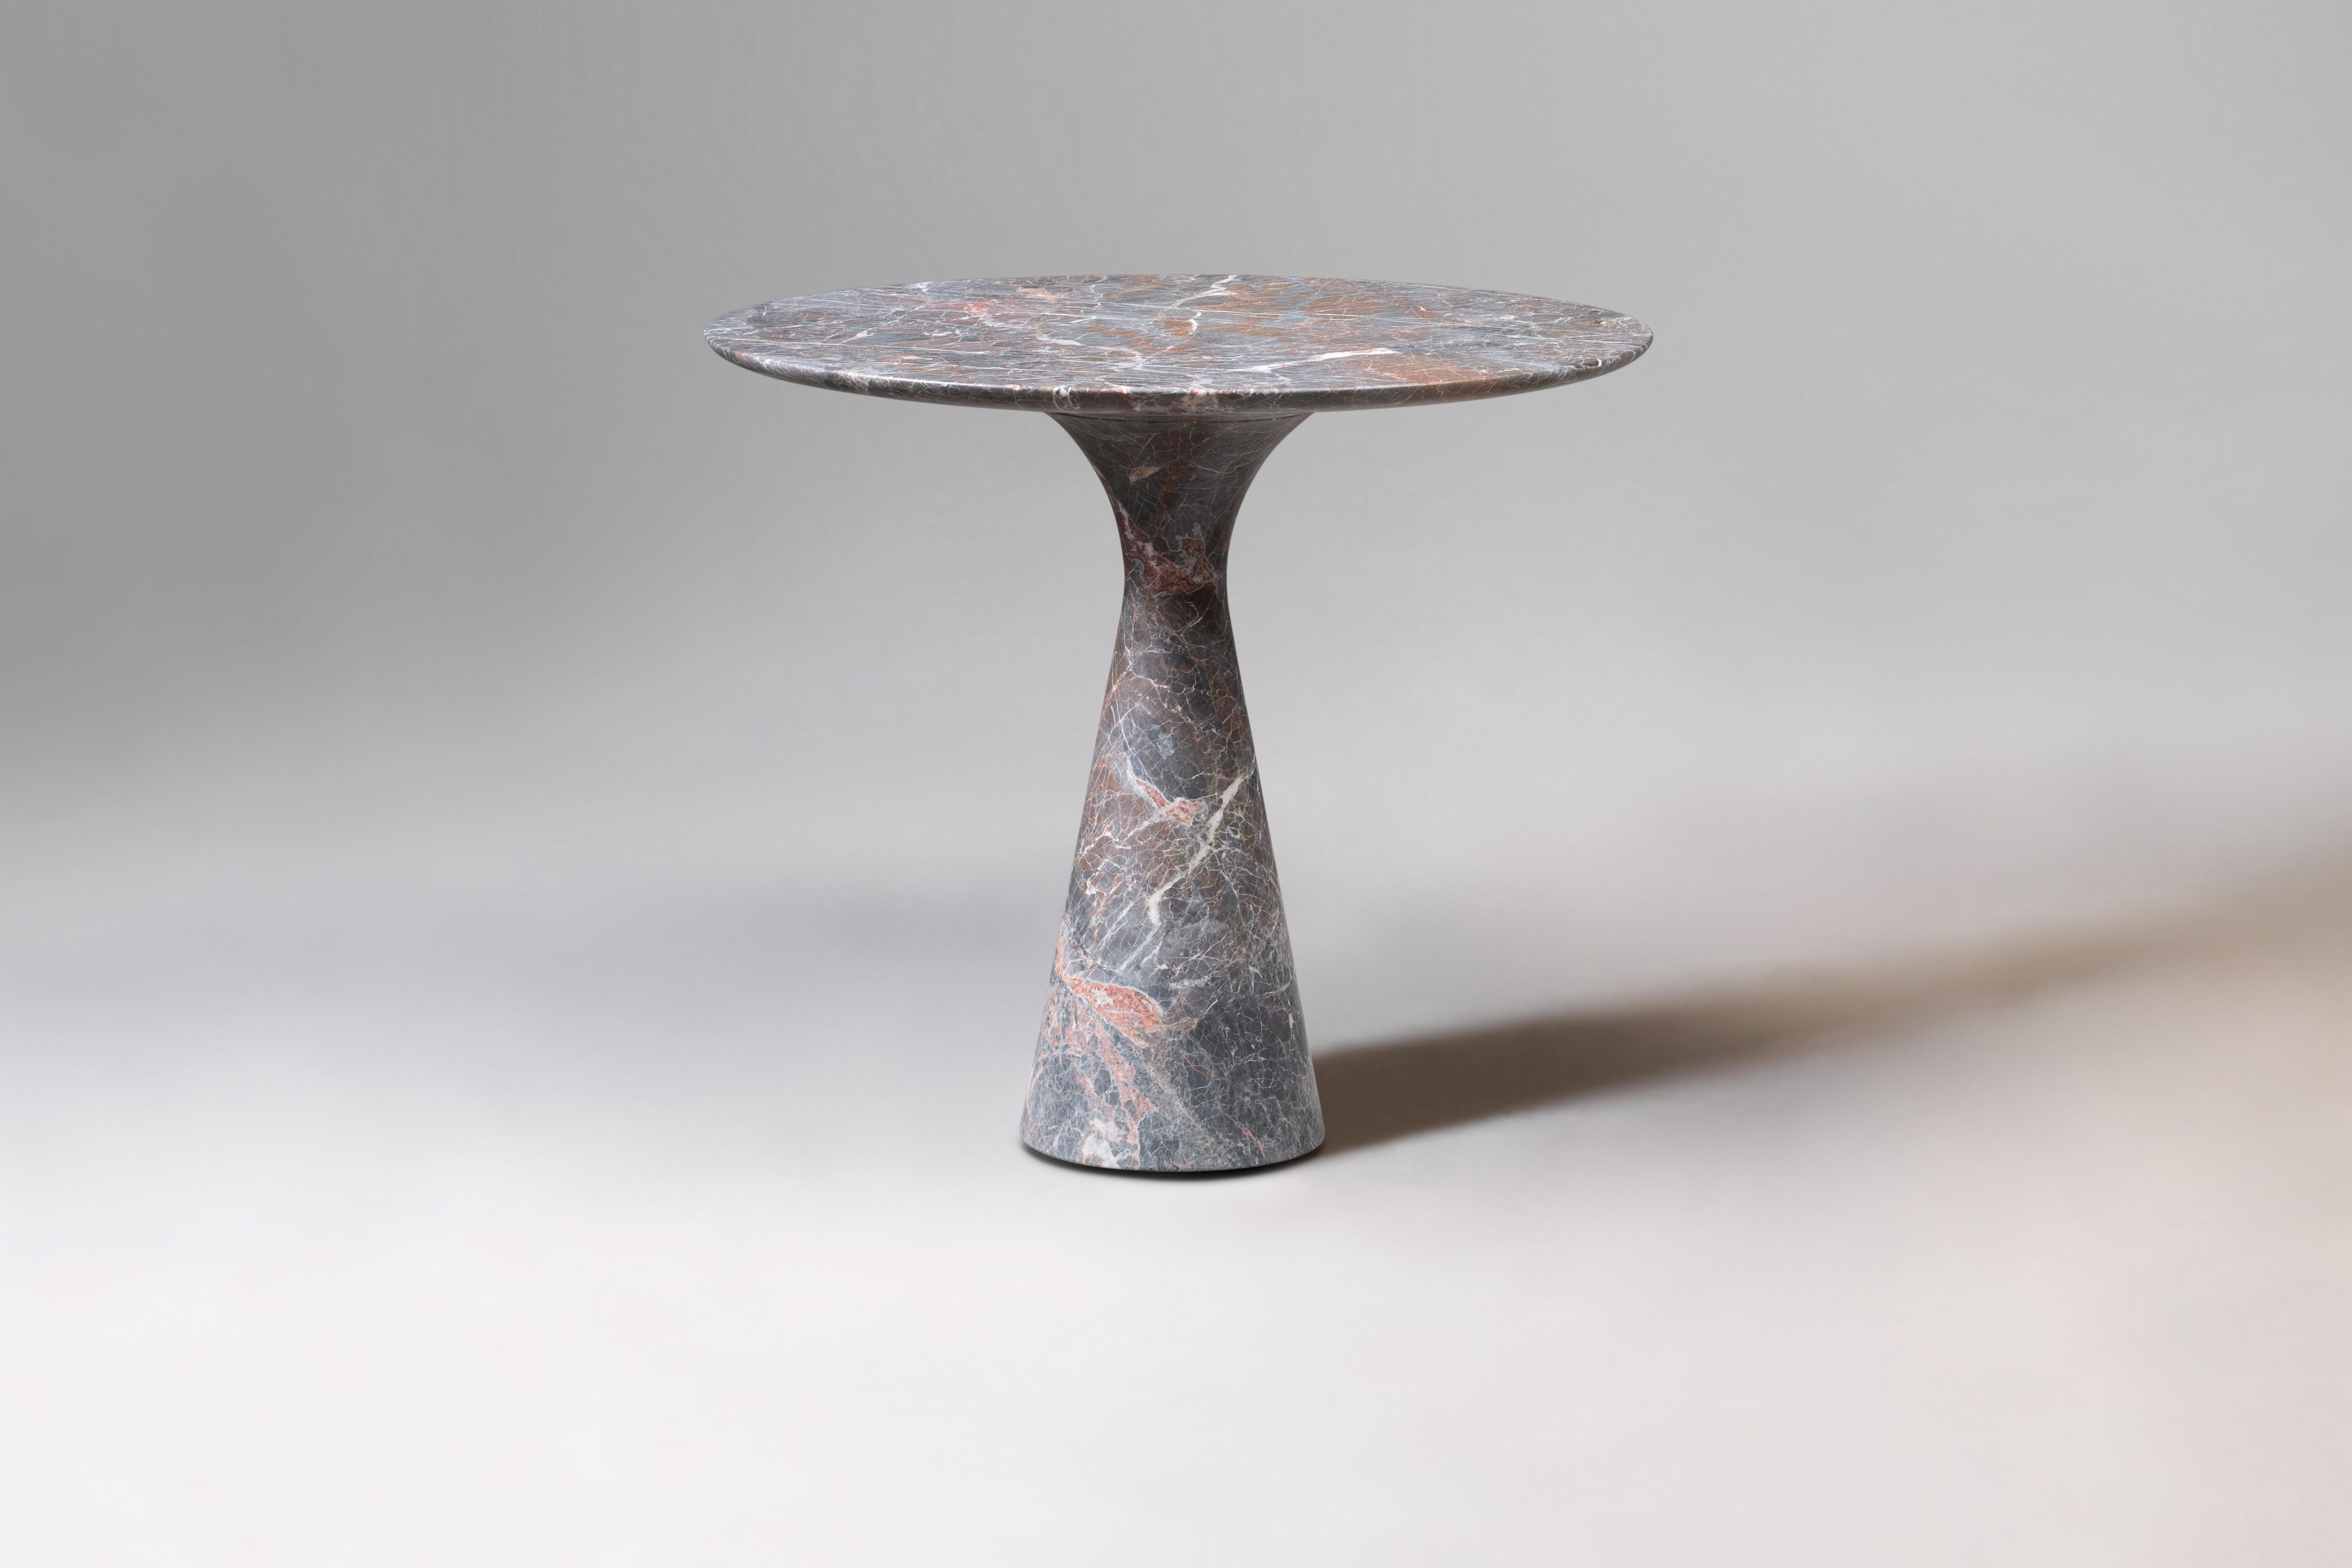 Grey Saint Laurent Refined Contemporary Marble Side Table 62/45
Dimensions: diameter 62 x height 45 cm
Materials: Grey Saint Laurent

Angelo is the essence of a round table in natural stone, a sculptural shape in robust material with elegant lines